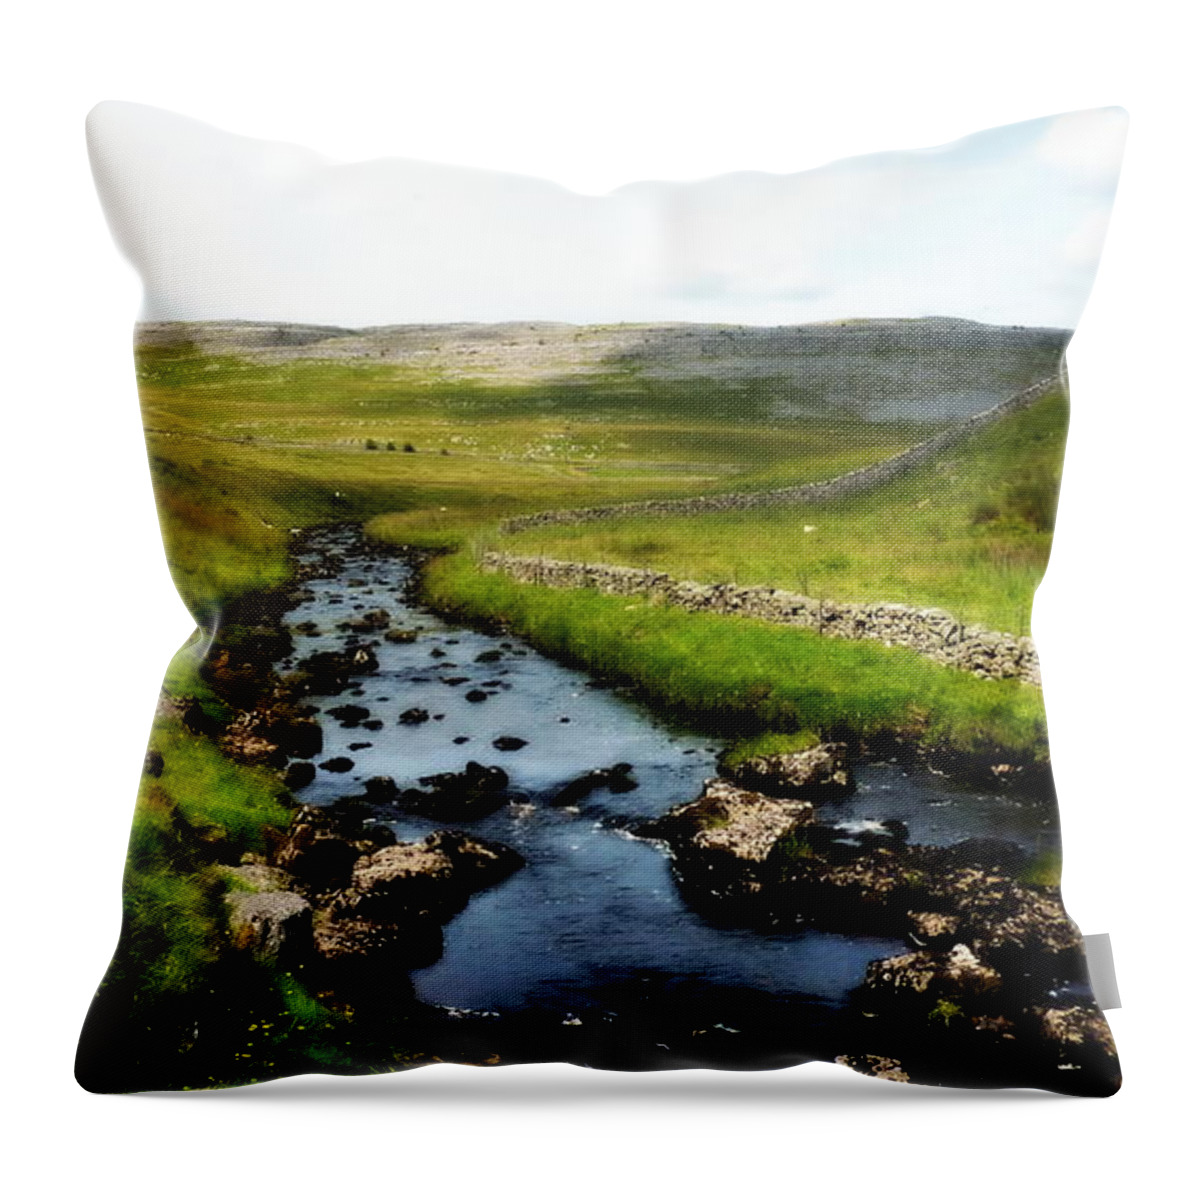 River Throw Pillow featuring the photograph Landscape by Lukasz Ryszka